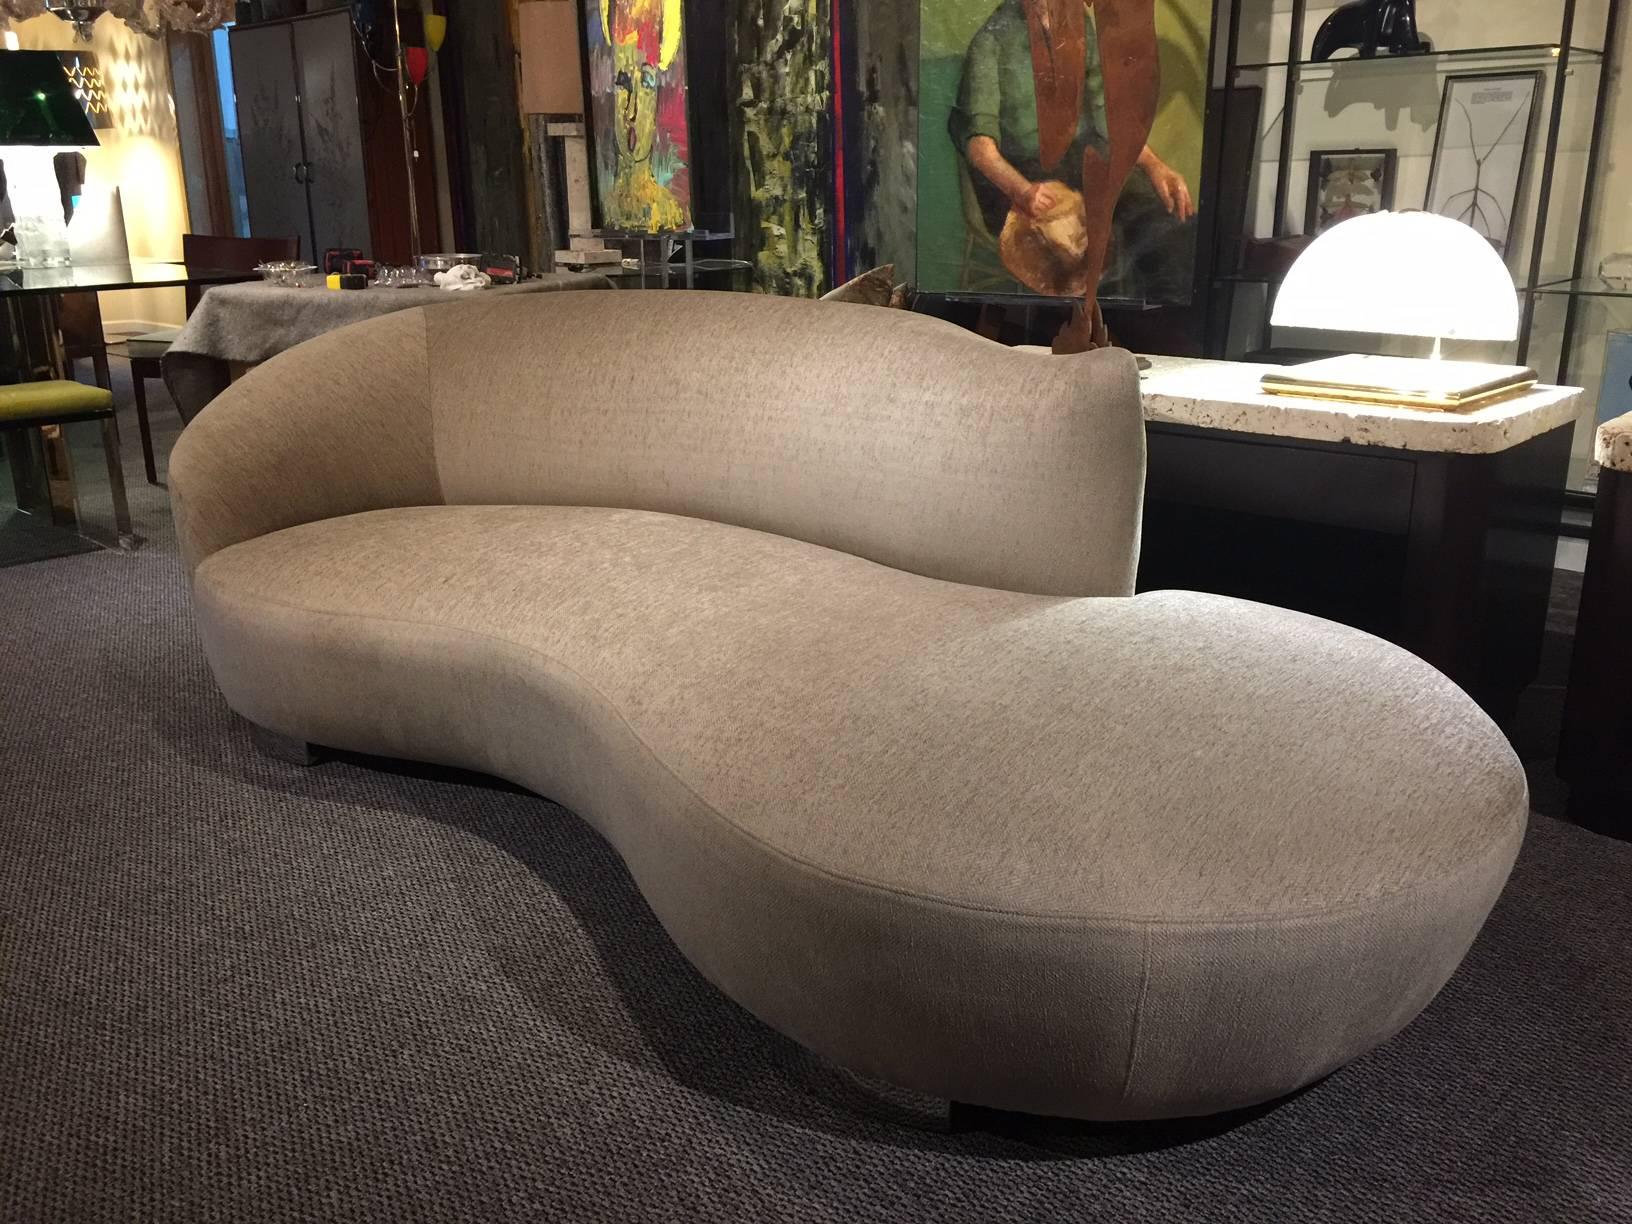 Note: Priced and sold individually.

Perfectly matched pair of newly upholstered cloud sofas designed by American icon Vladimir Kagan for Preview furniture in the 1980s with chrome base feet. Fabric is a Fine silk/chenille blend in soft beige